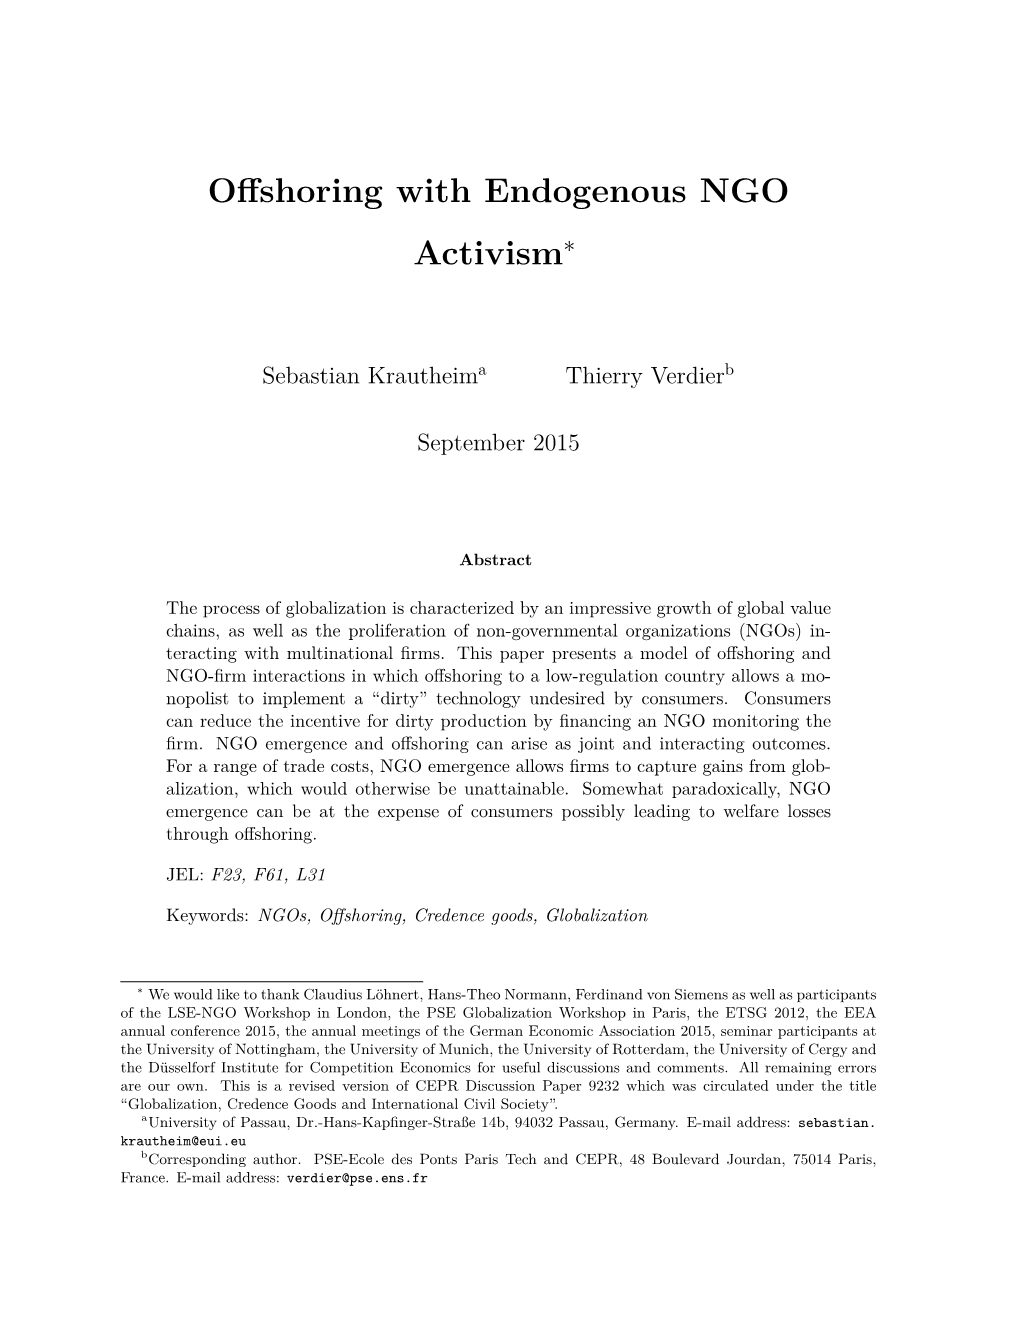 Offshoring with Endogenous NGO Activism